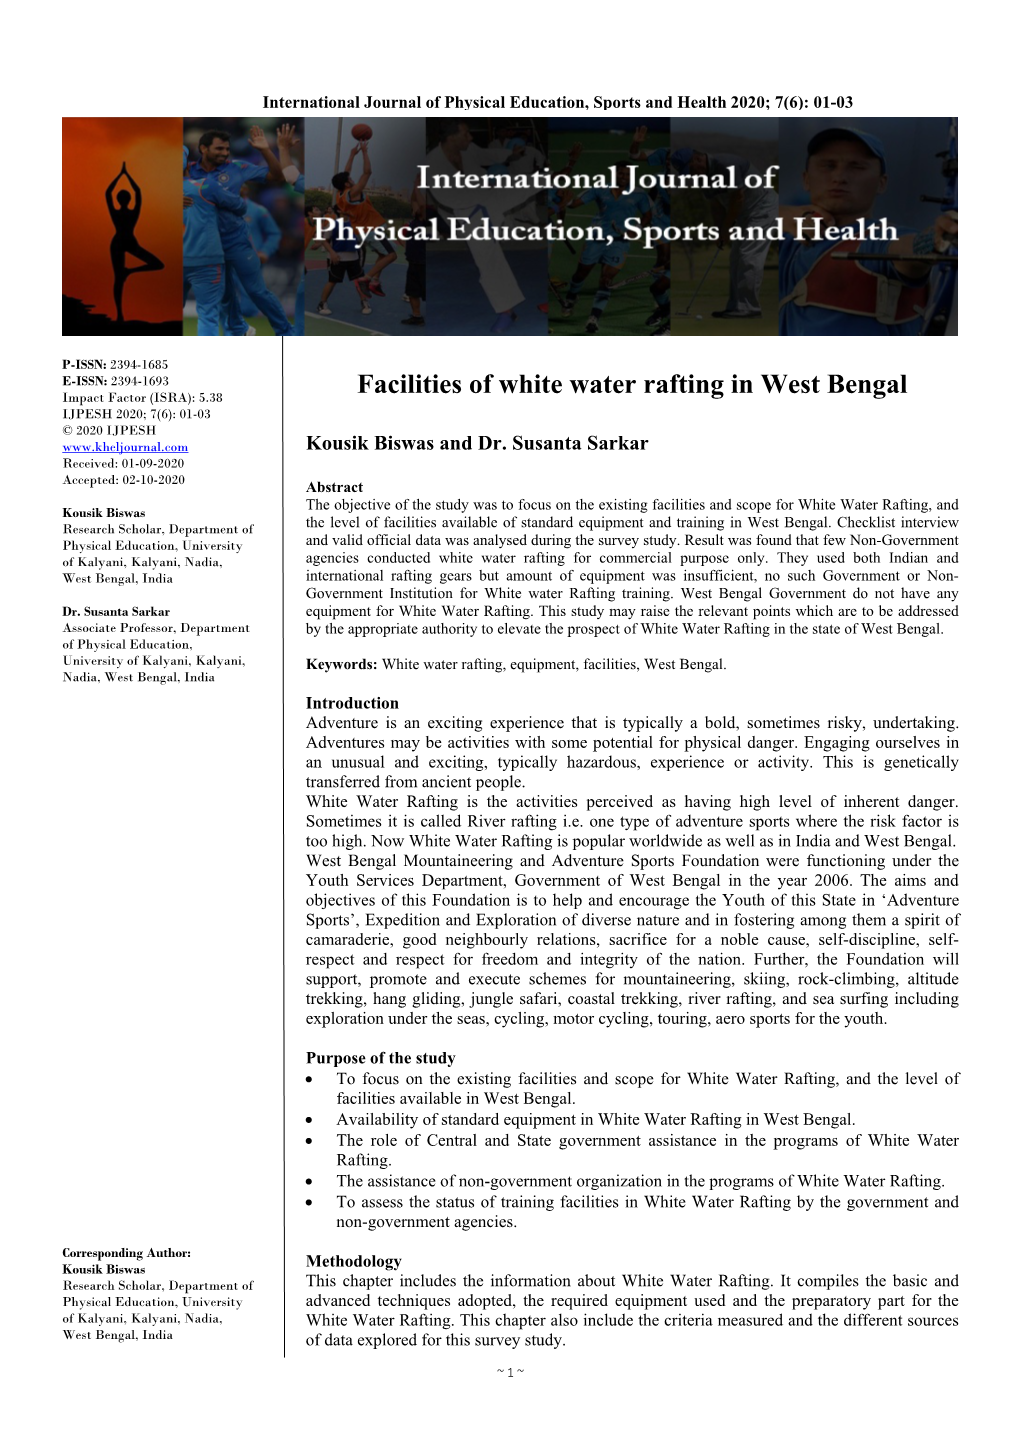 Facilities of White Water Rafting in West Bengal IJPESH 2020; 7(6): 01-03 © 2020 IJPESH Kousik Biswas and Dr